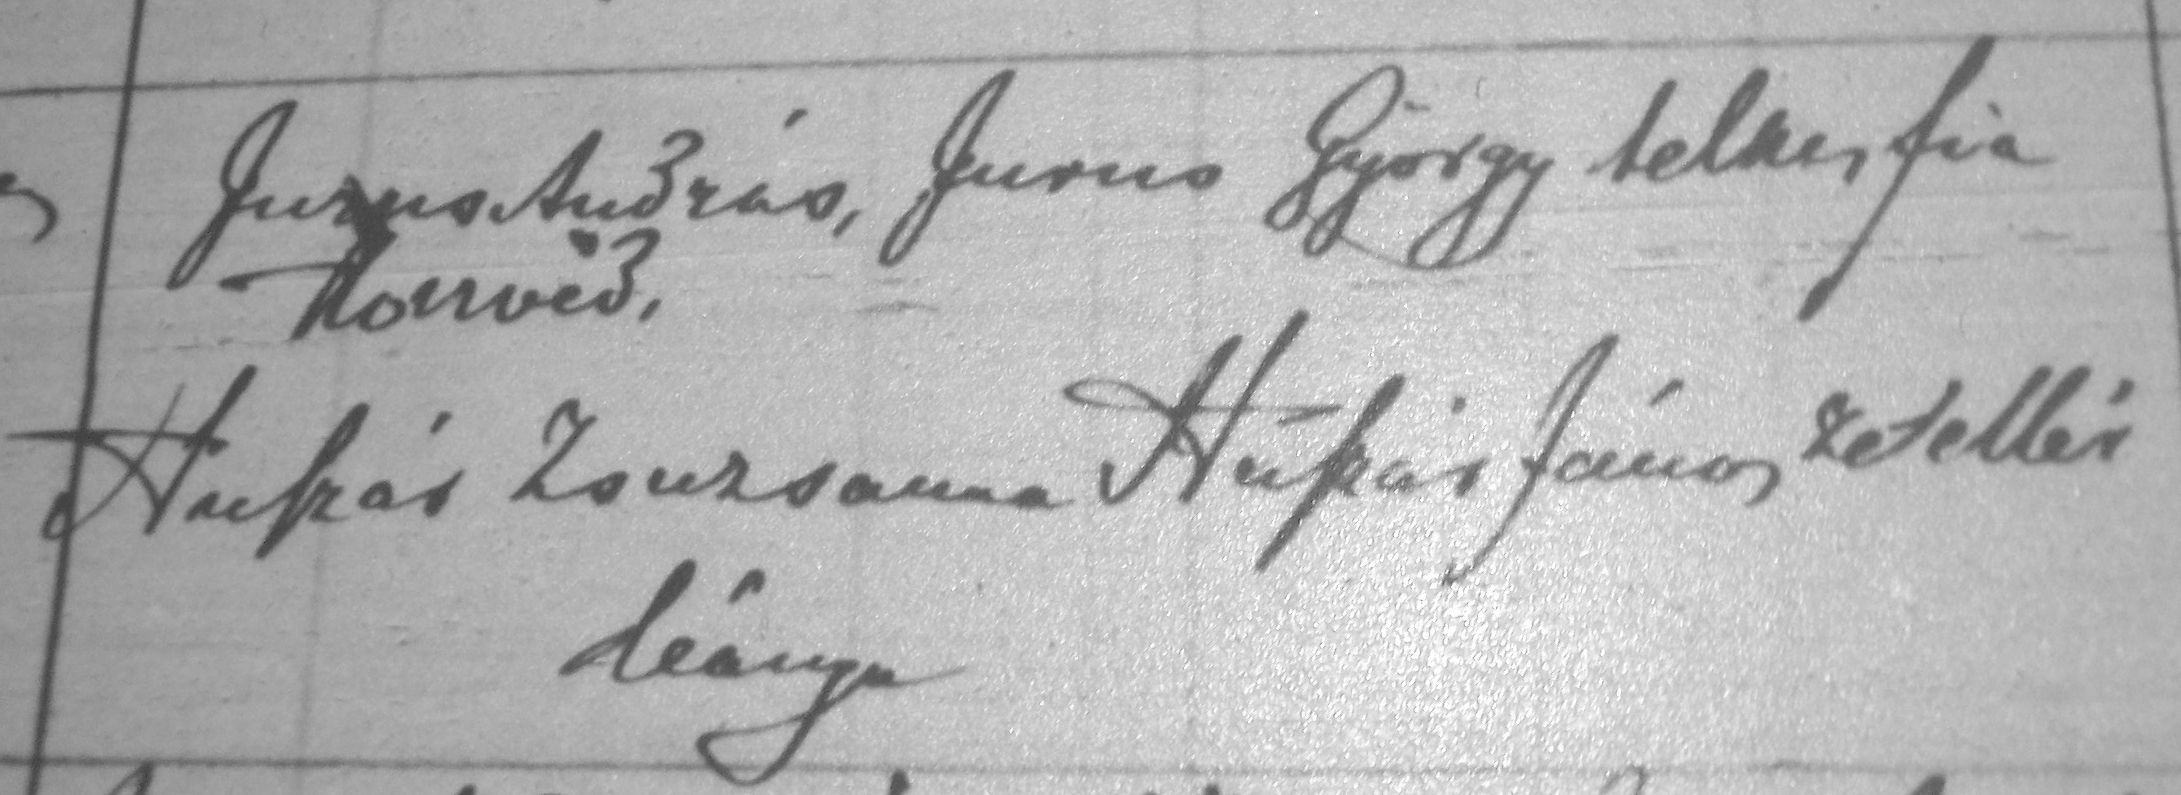 The marriage record of Anna's parents shows the names of Andras Jurus and Zsuzsanna Huszar